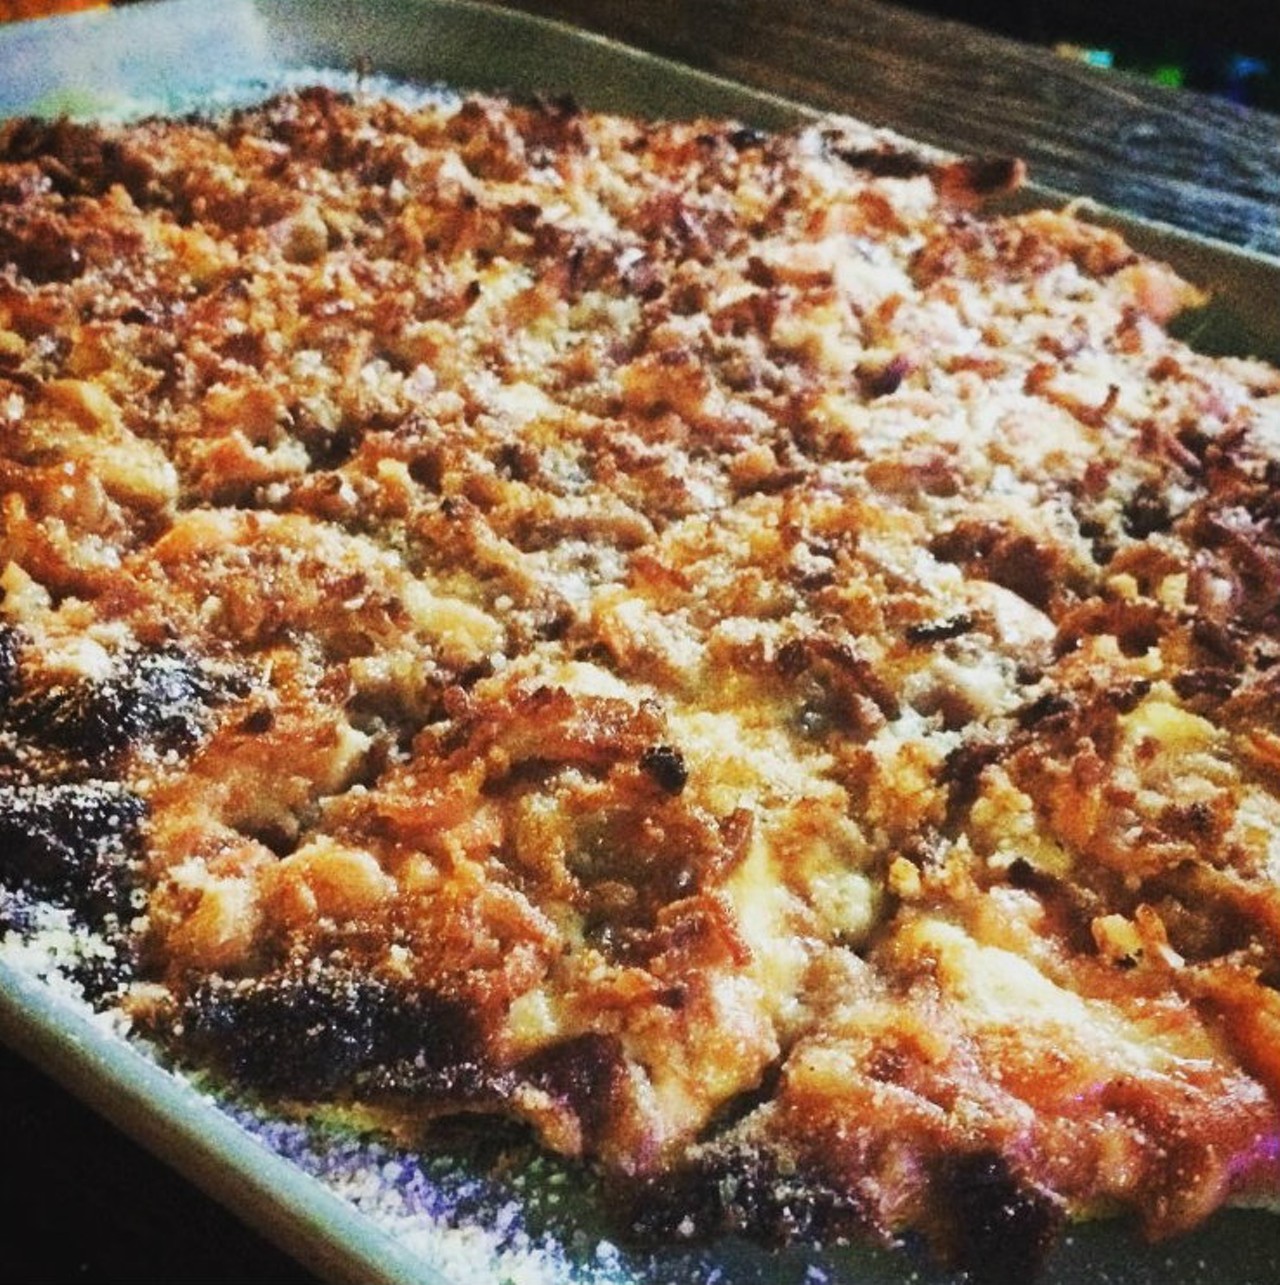 Immerse yourself in north county pizza at BJ's Bar and Restaurant
It's a thing you can't get anywhere else in the nation, and it's incredibly tasty. Pro tip: If you hit BJ's on a weeknight, cans of beer are buy-one-get-one. Photo courtesy of Instagram / graceylu1309.